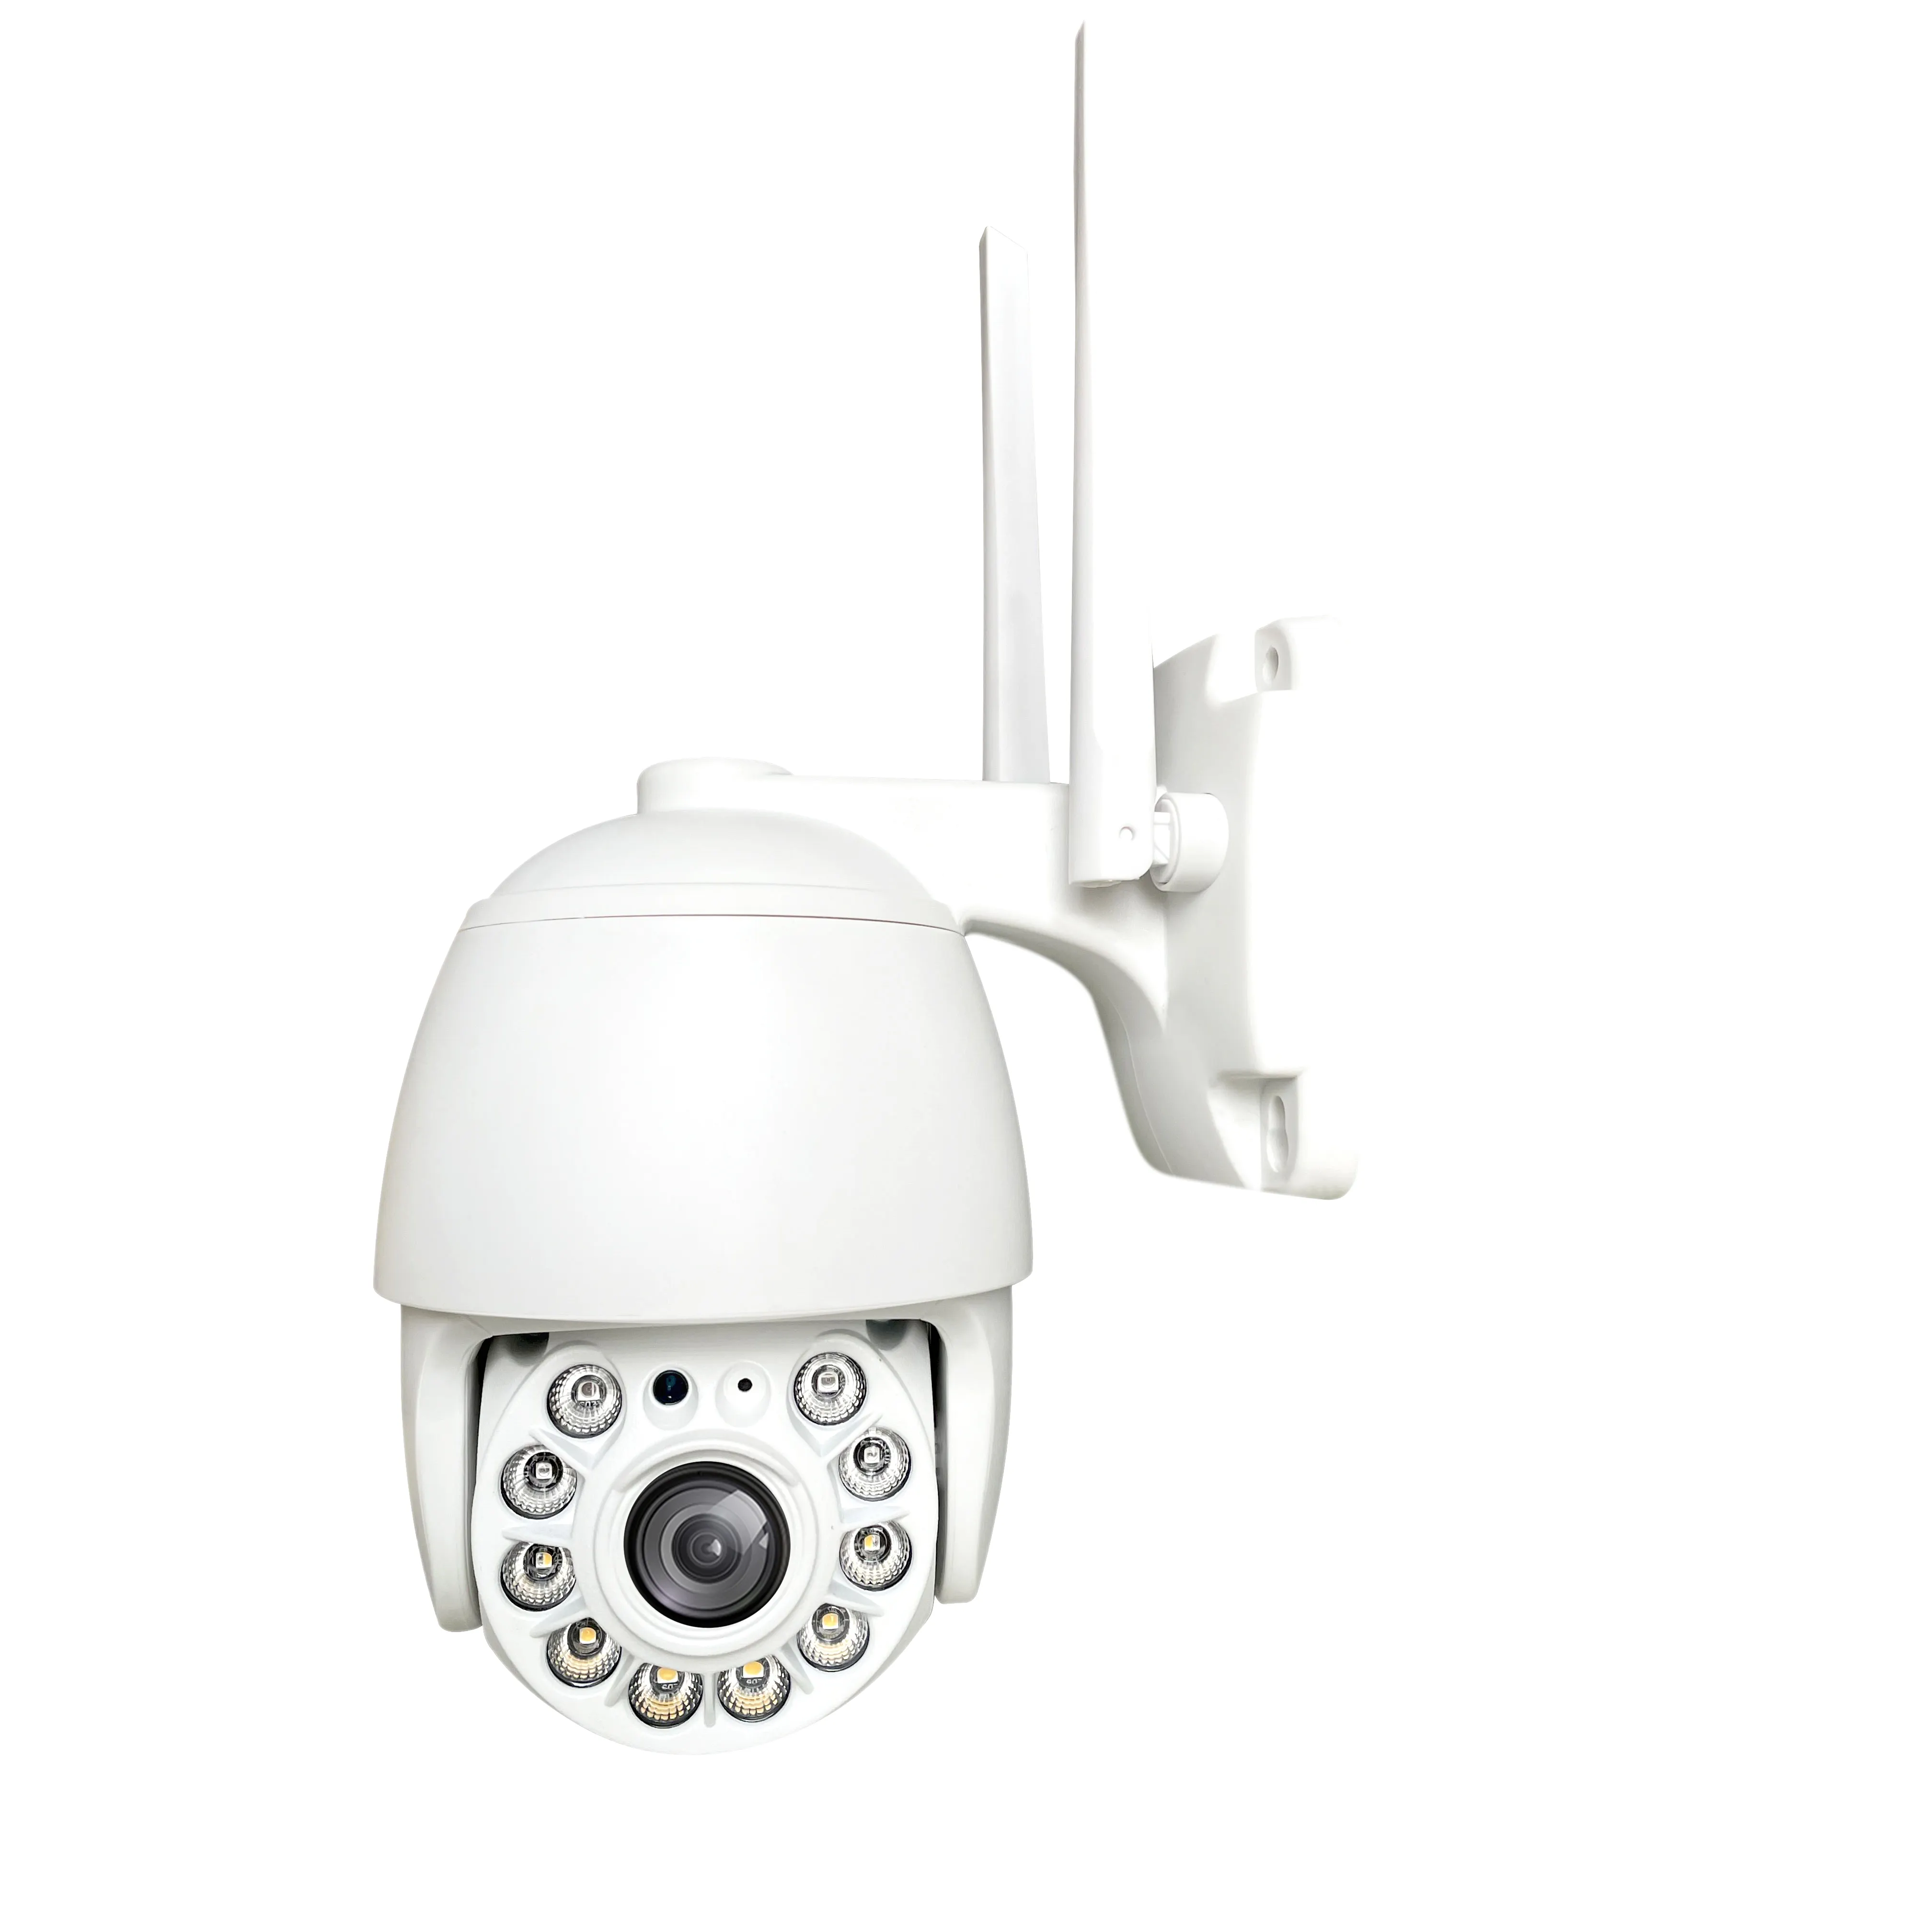 H.265 HD 3MP Eyeball Dome POE IP Camera Indoor Security 2.8-12mm Manual Zoom 30M IR Distance Motion Detection P2P Mobile Viewing